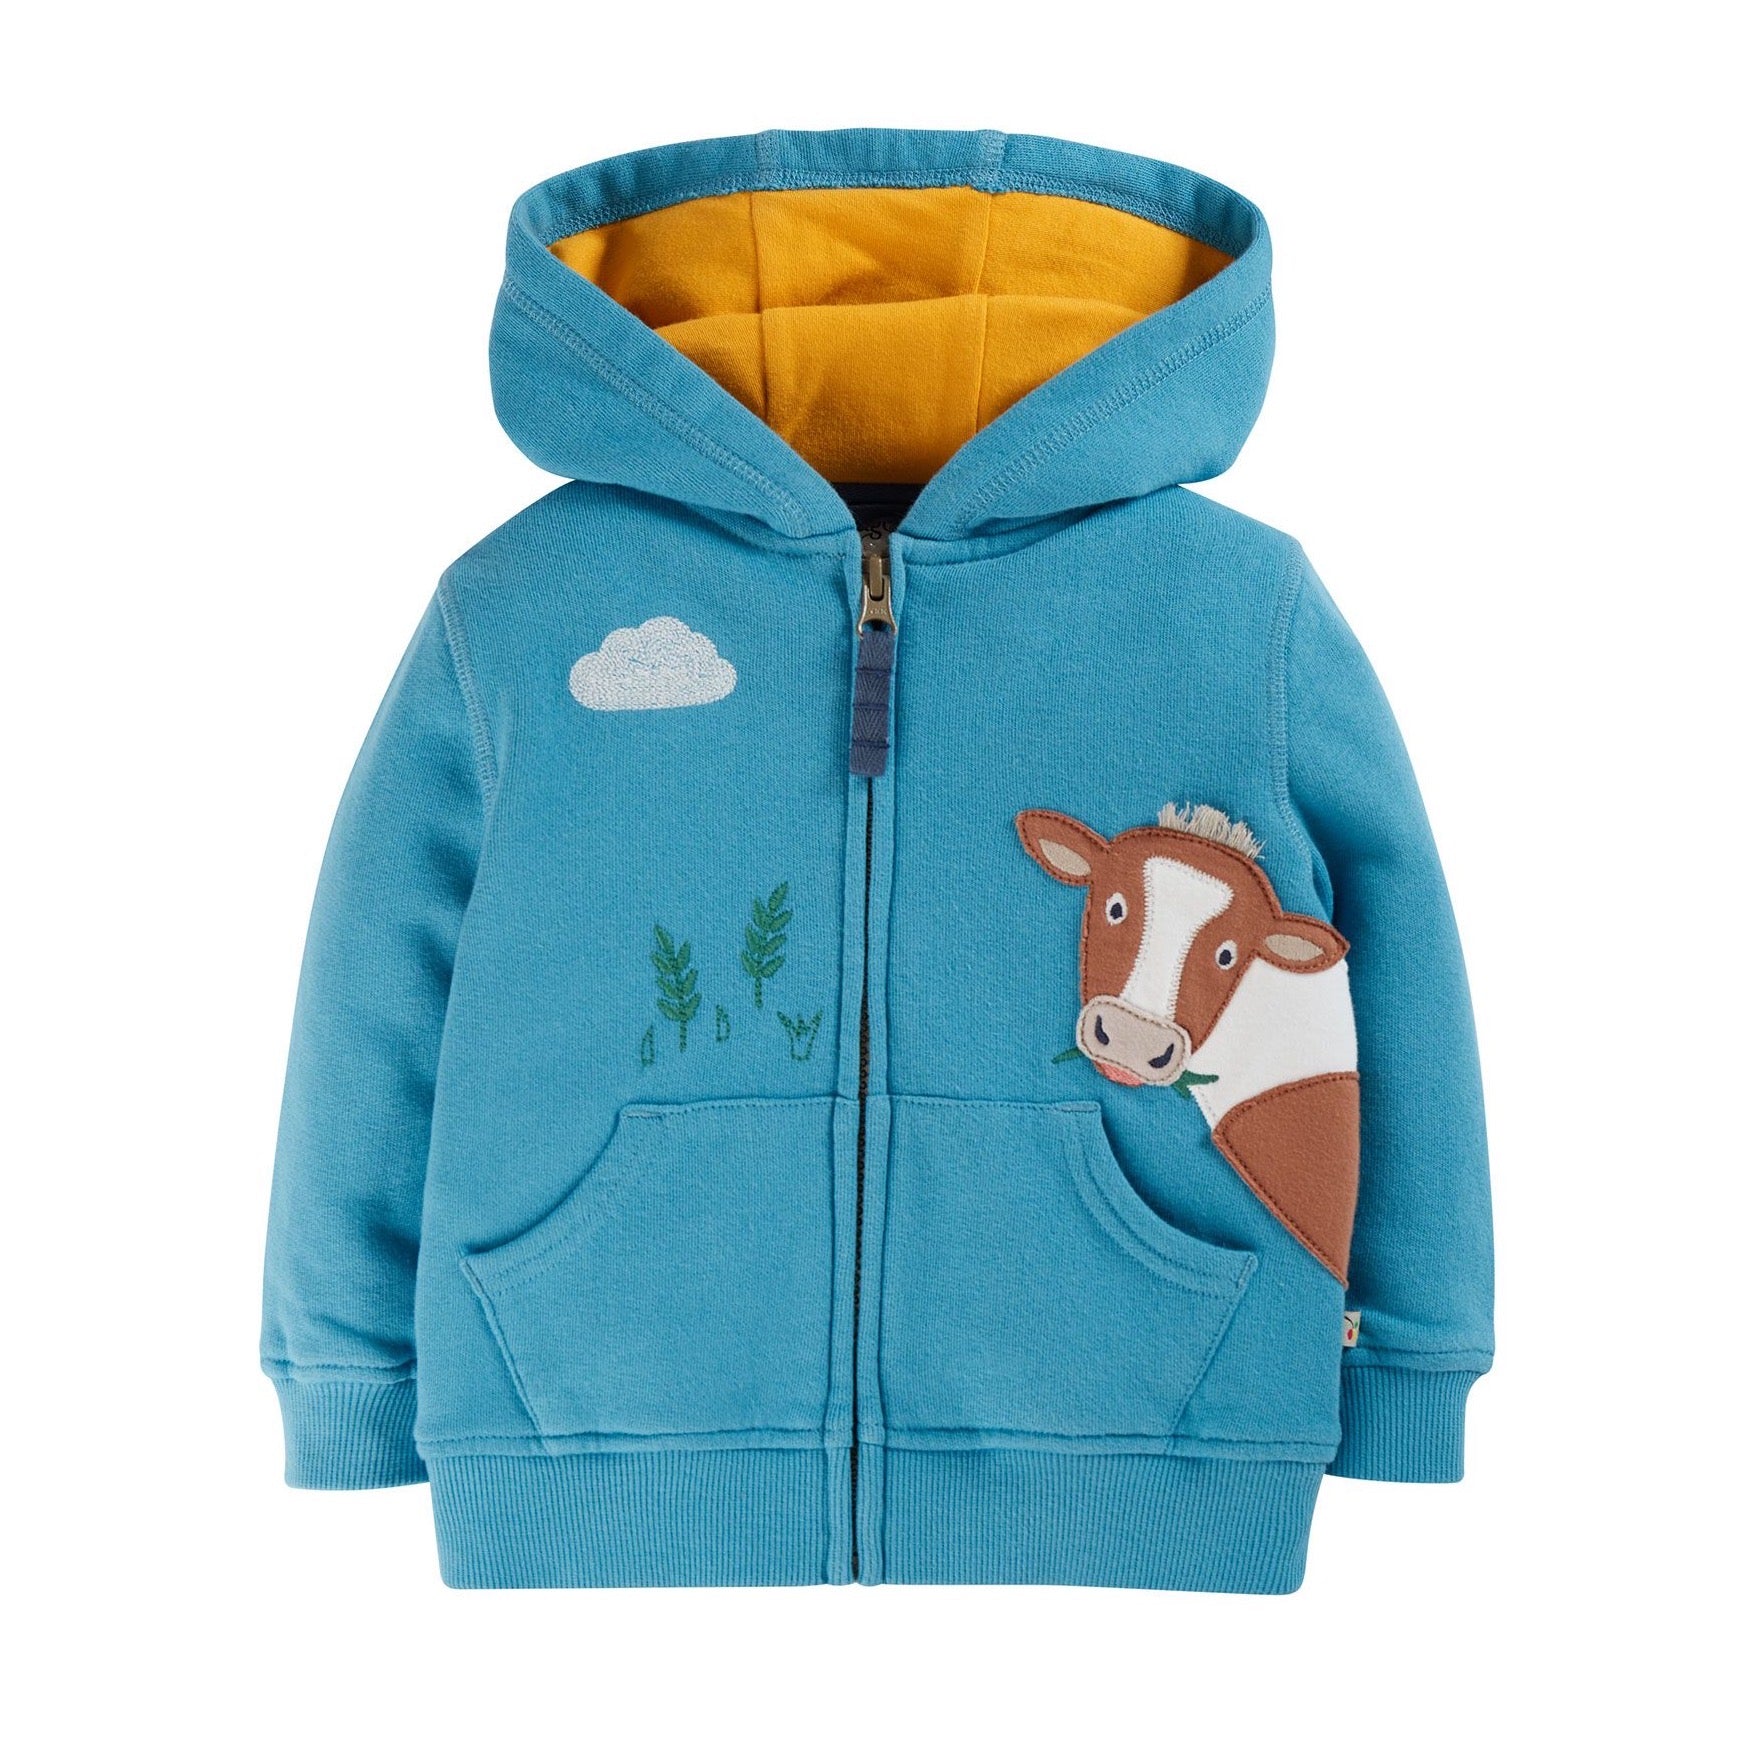 Frugi Carbis Infant Hoodie Blue Cow Clothing 3-6M / Blue,6-9M / Blue,9-12M / Blue,12-18M / Blue,18-24M / Blue,2-3YRS / Blue,3-4YRS / Blue